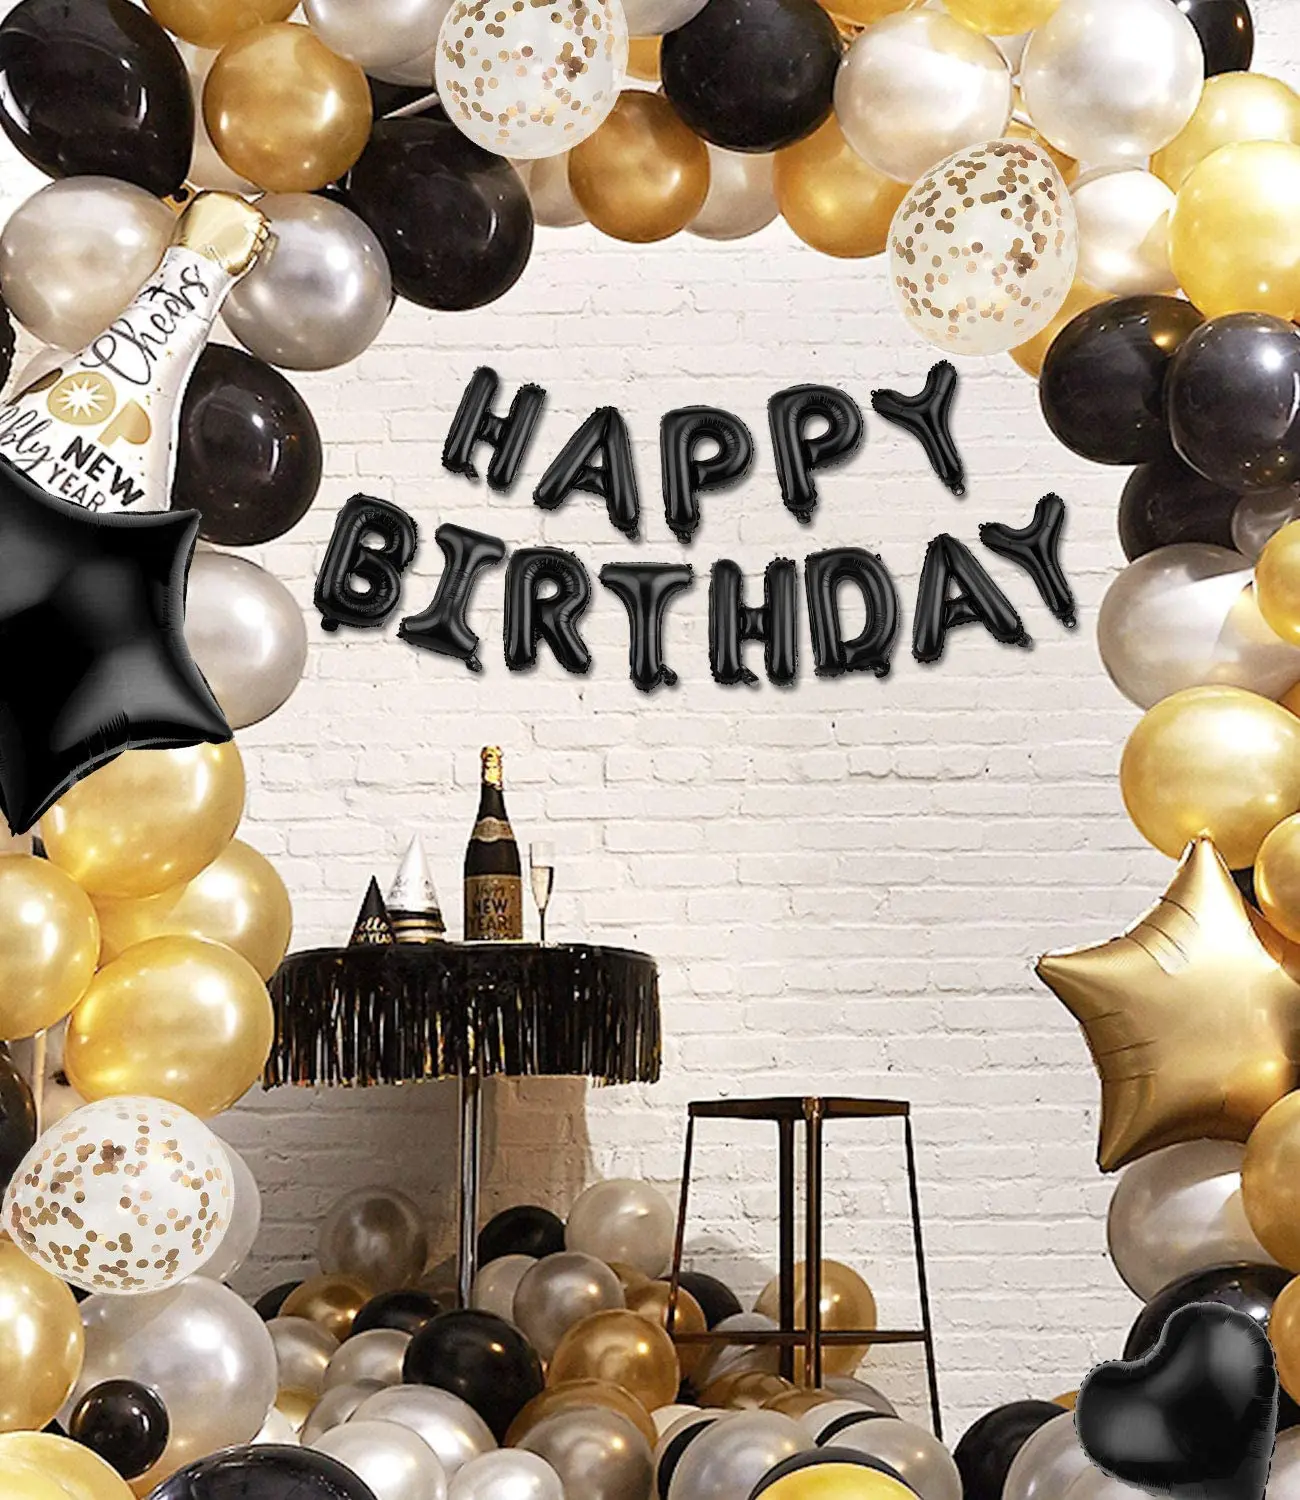 Black and Silver Birthday Party Decorations for Men Women Boys Girls Happy Birthday Banner Balloons Foil Fringe Curtains Black and White Party